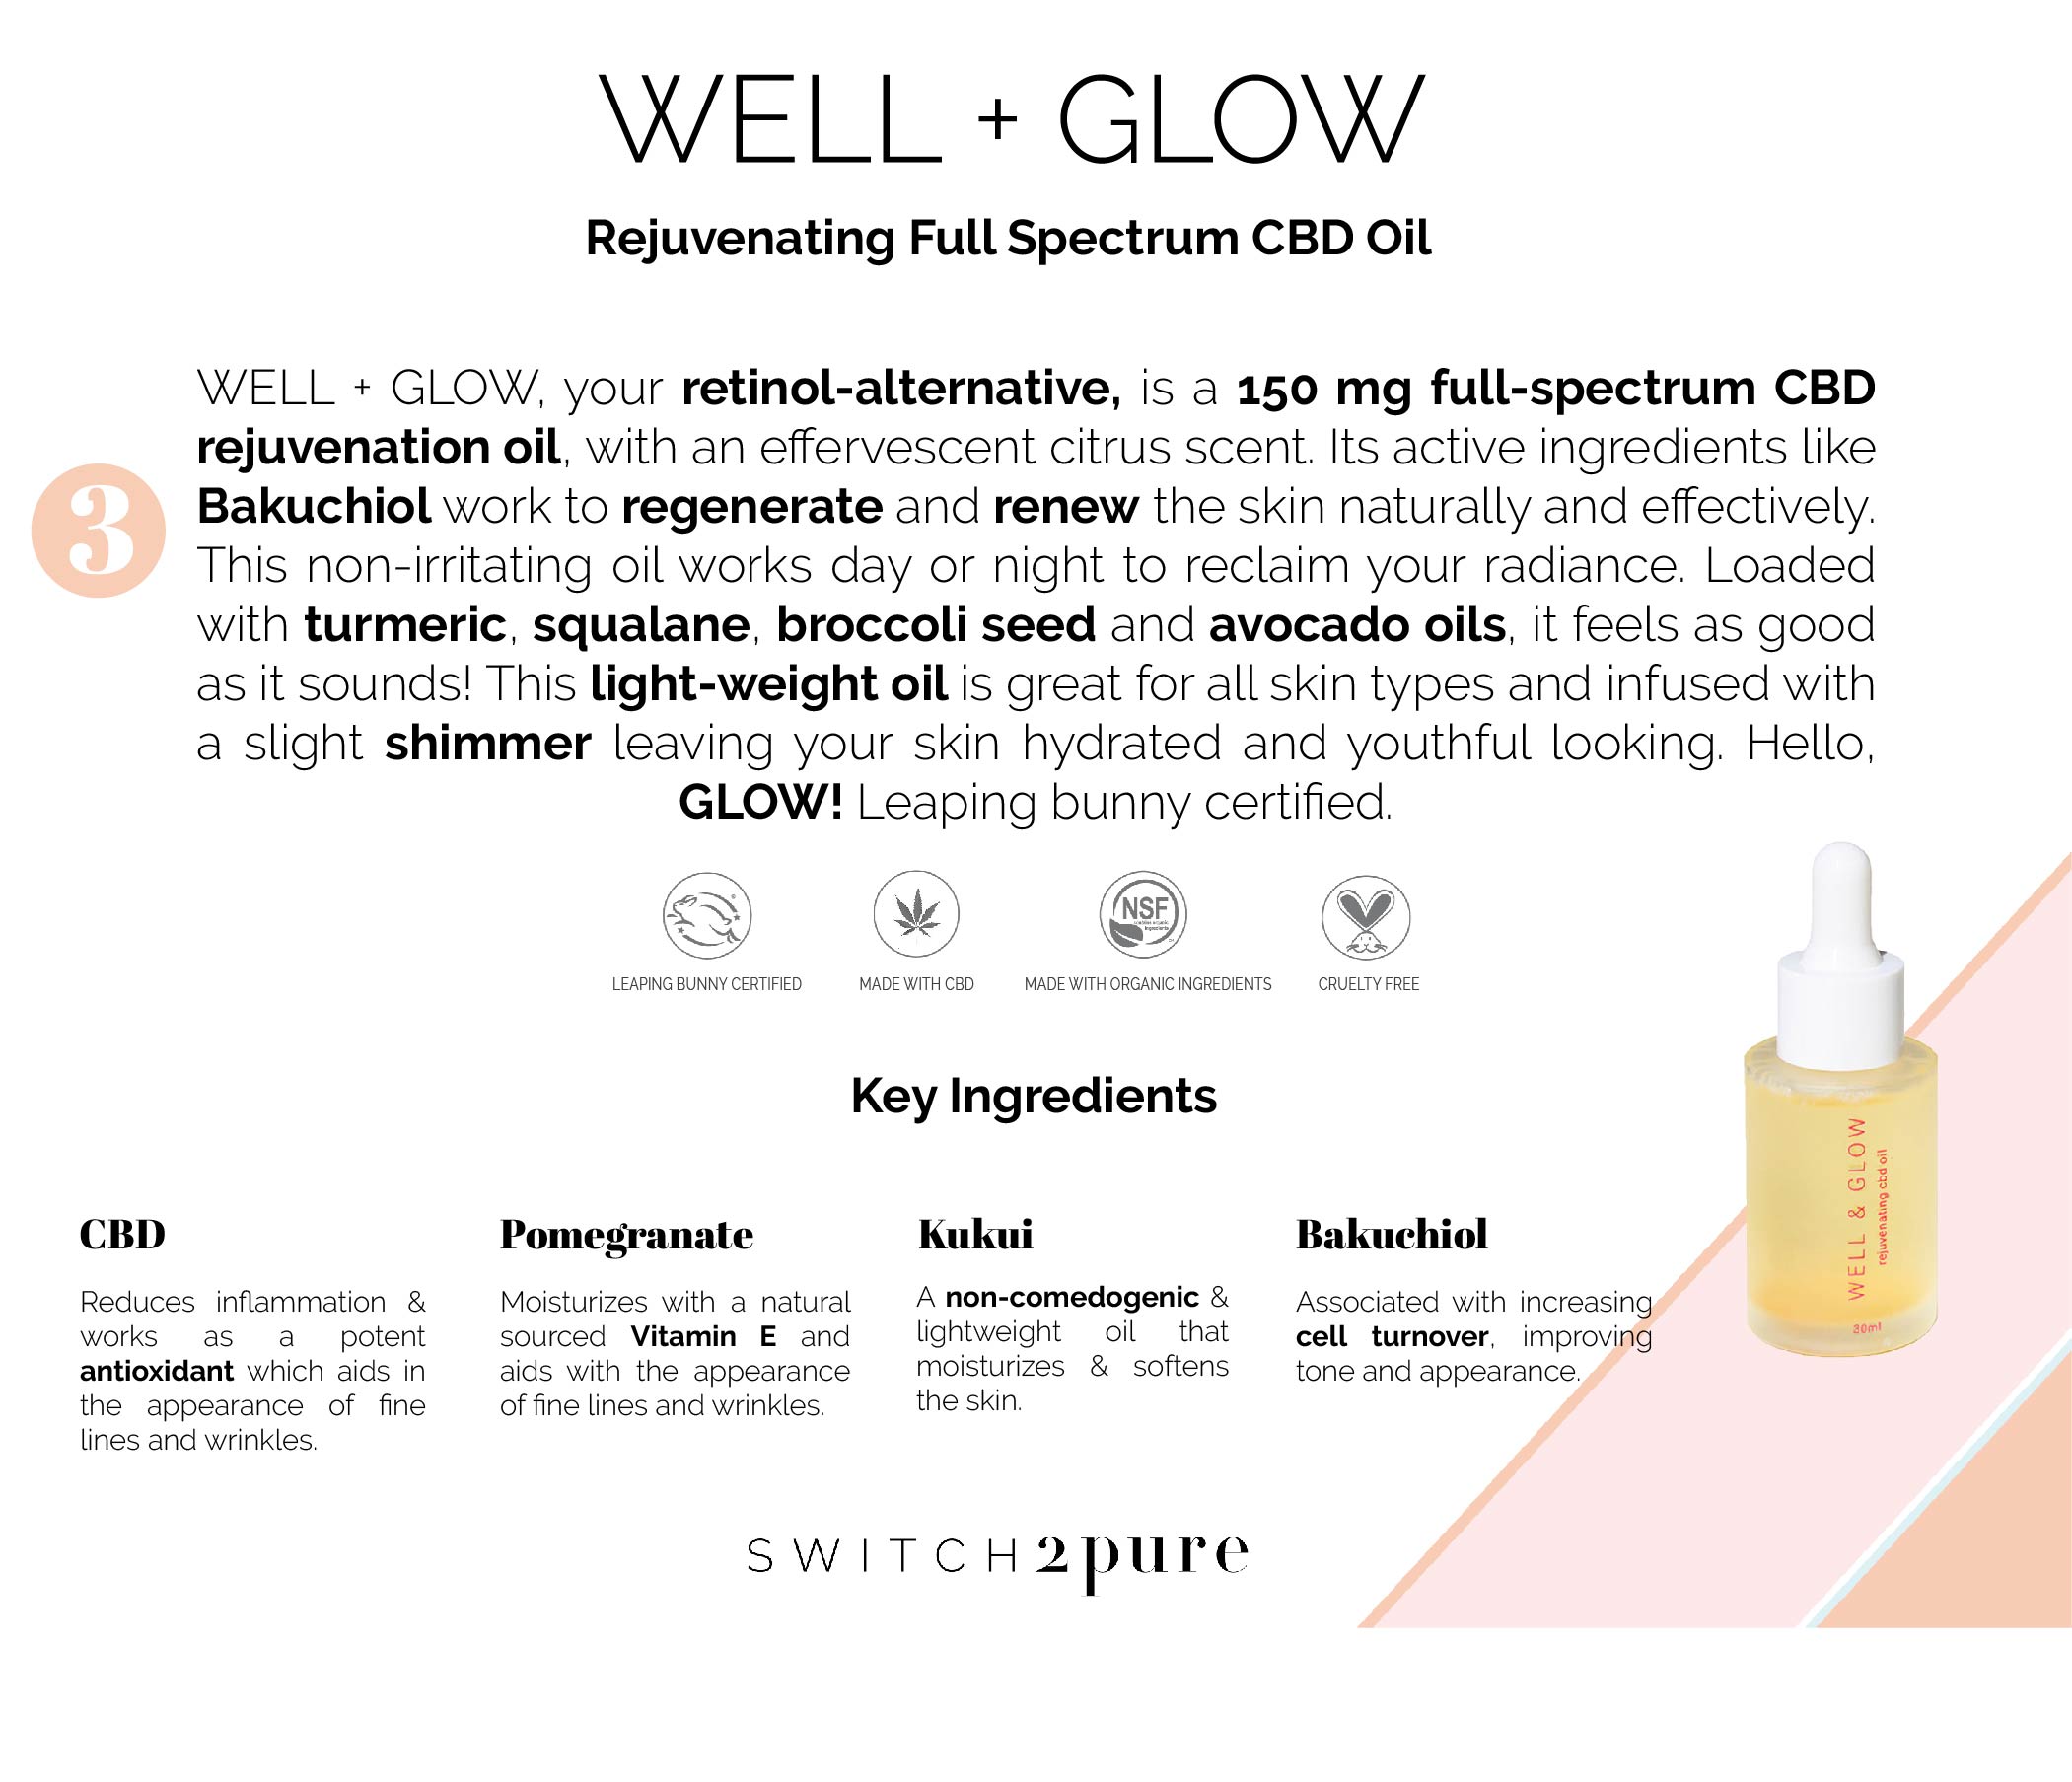 Switch2pure well & glow rejuvenating facial oil